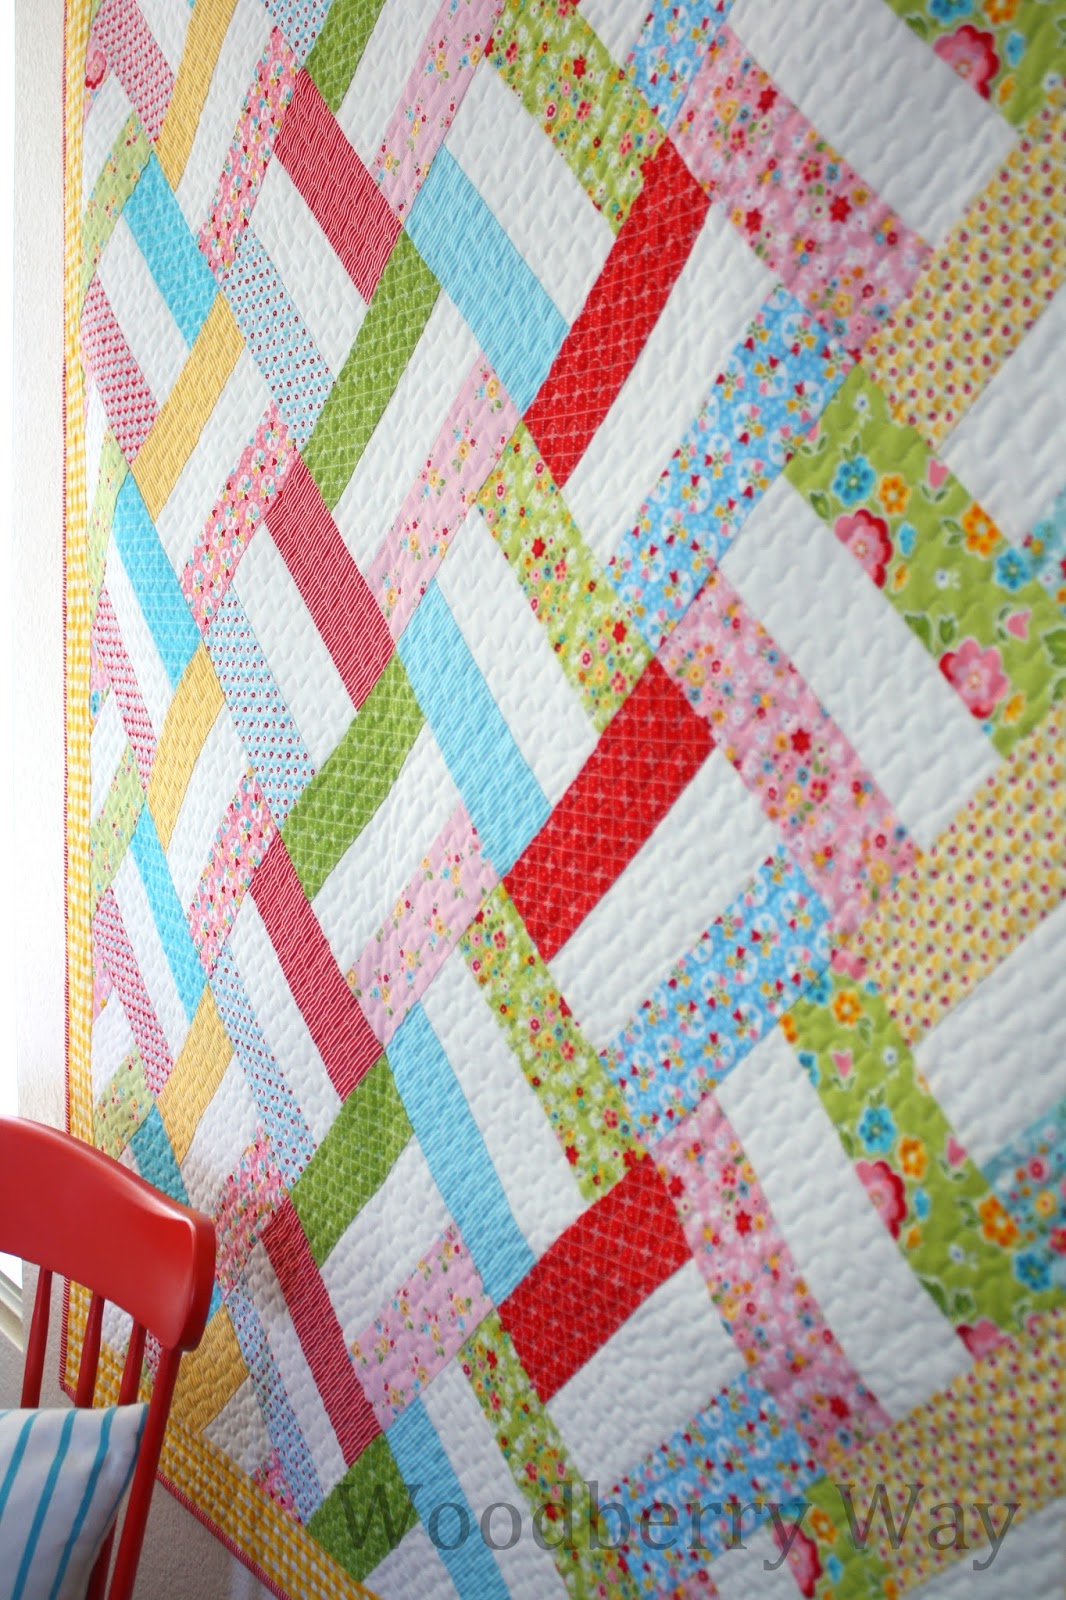 quilt-story-easy-strip-quilt-pattern-from-woodberryway